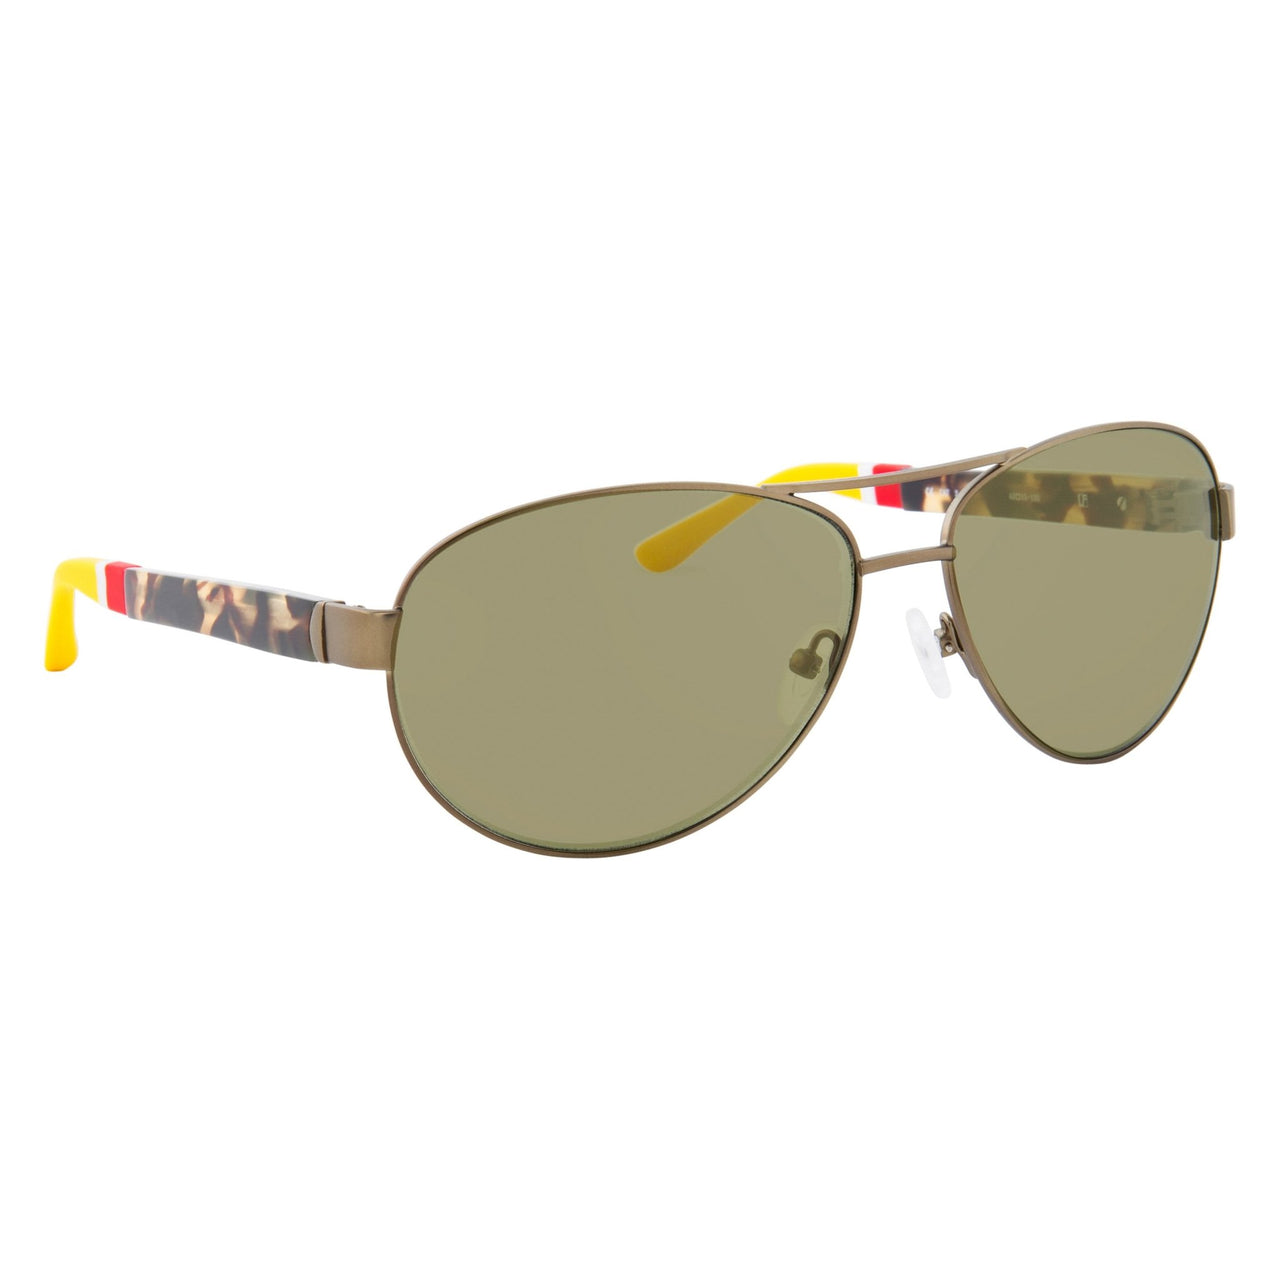 Orlebar Brown Sunglasses Camo Tortise Shell with Army Green Mirror Lenses OB38C5SUN - Watches & Crystals